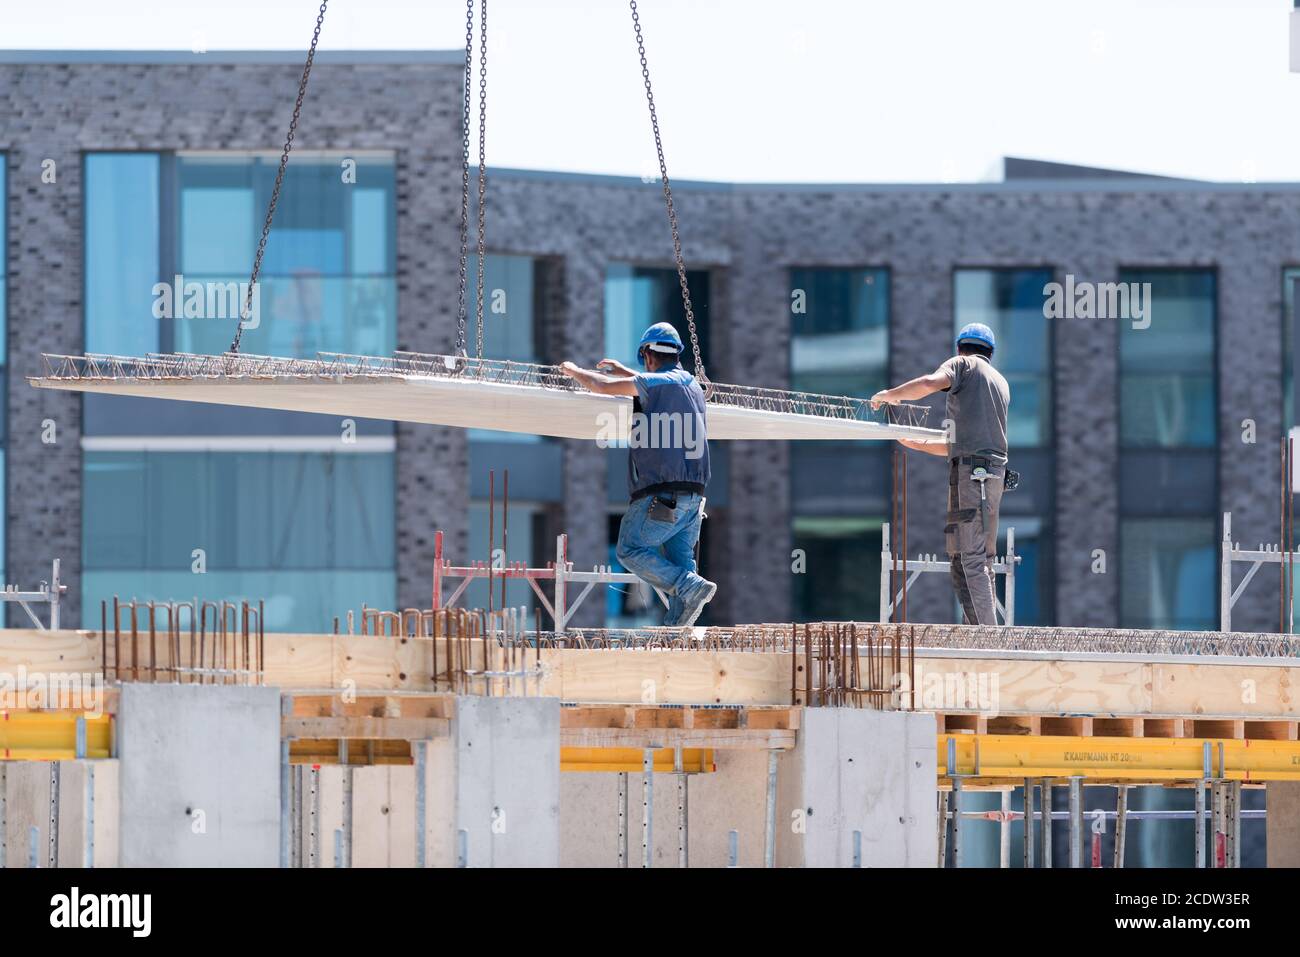 Building industry Stock Photo